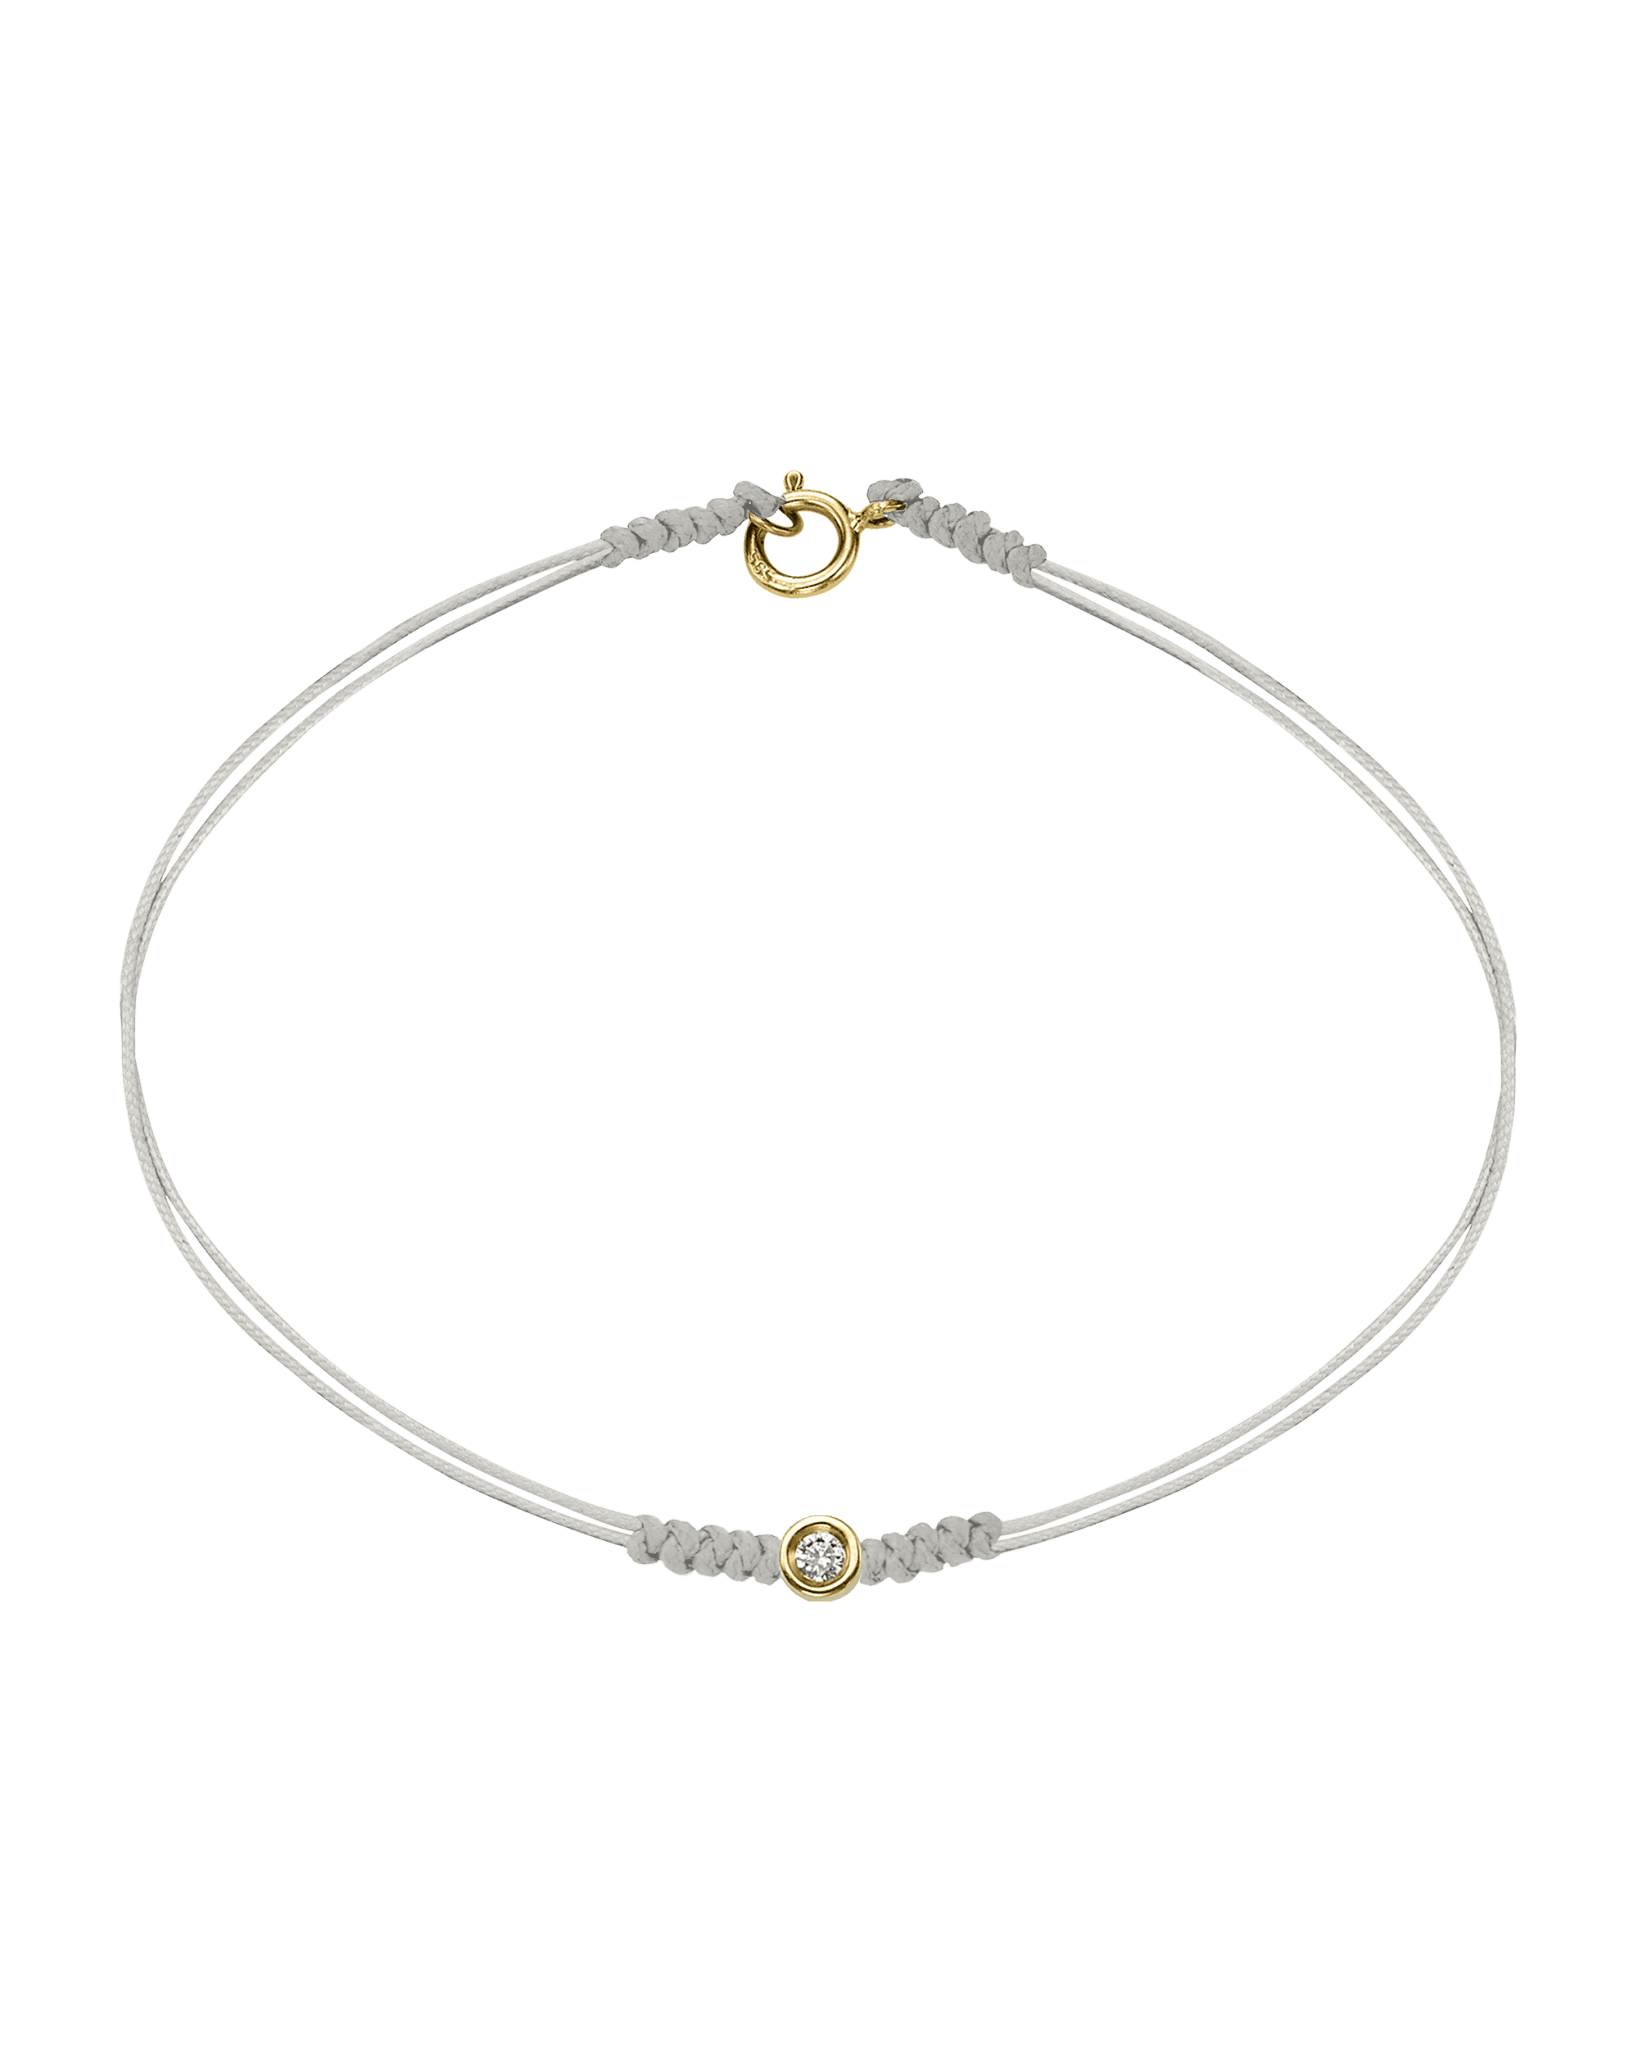 The Classic String of Love with clasp - 14K Yellow Gold Bracelets 14K Solid Gold Pearl Small: 0.03ct Small - 6 Inches (15.5cm)